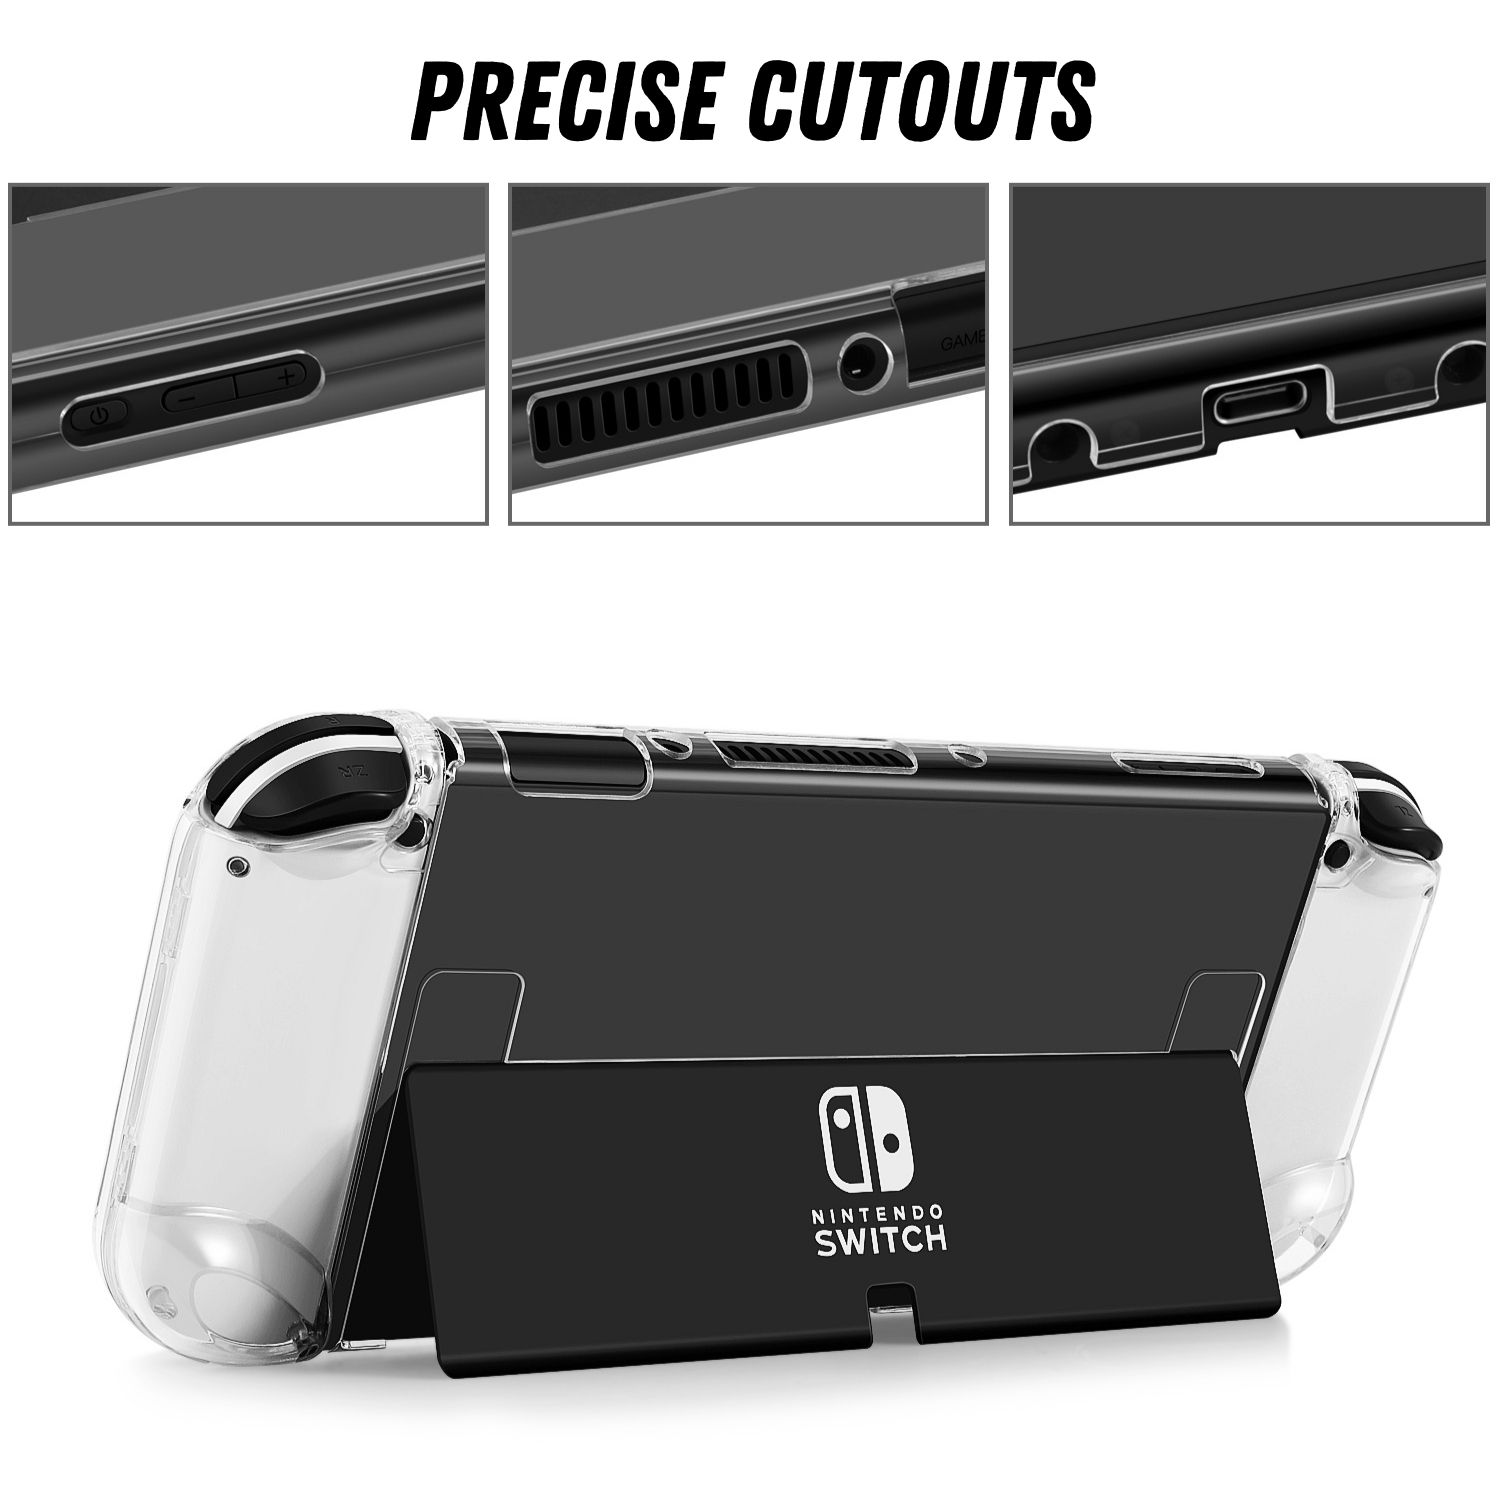 Precise Fit - The precise cutouts of the switch OLED grip case ensure that your device stays protected while giving you full access to all buttons, ports, and controls, and use it to its full potential.